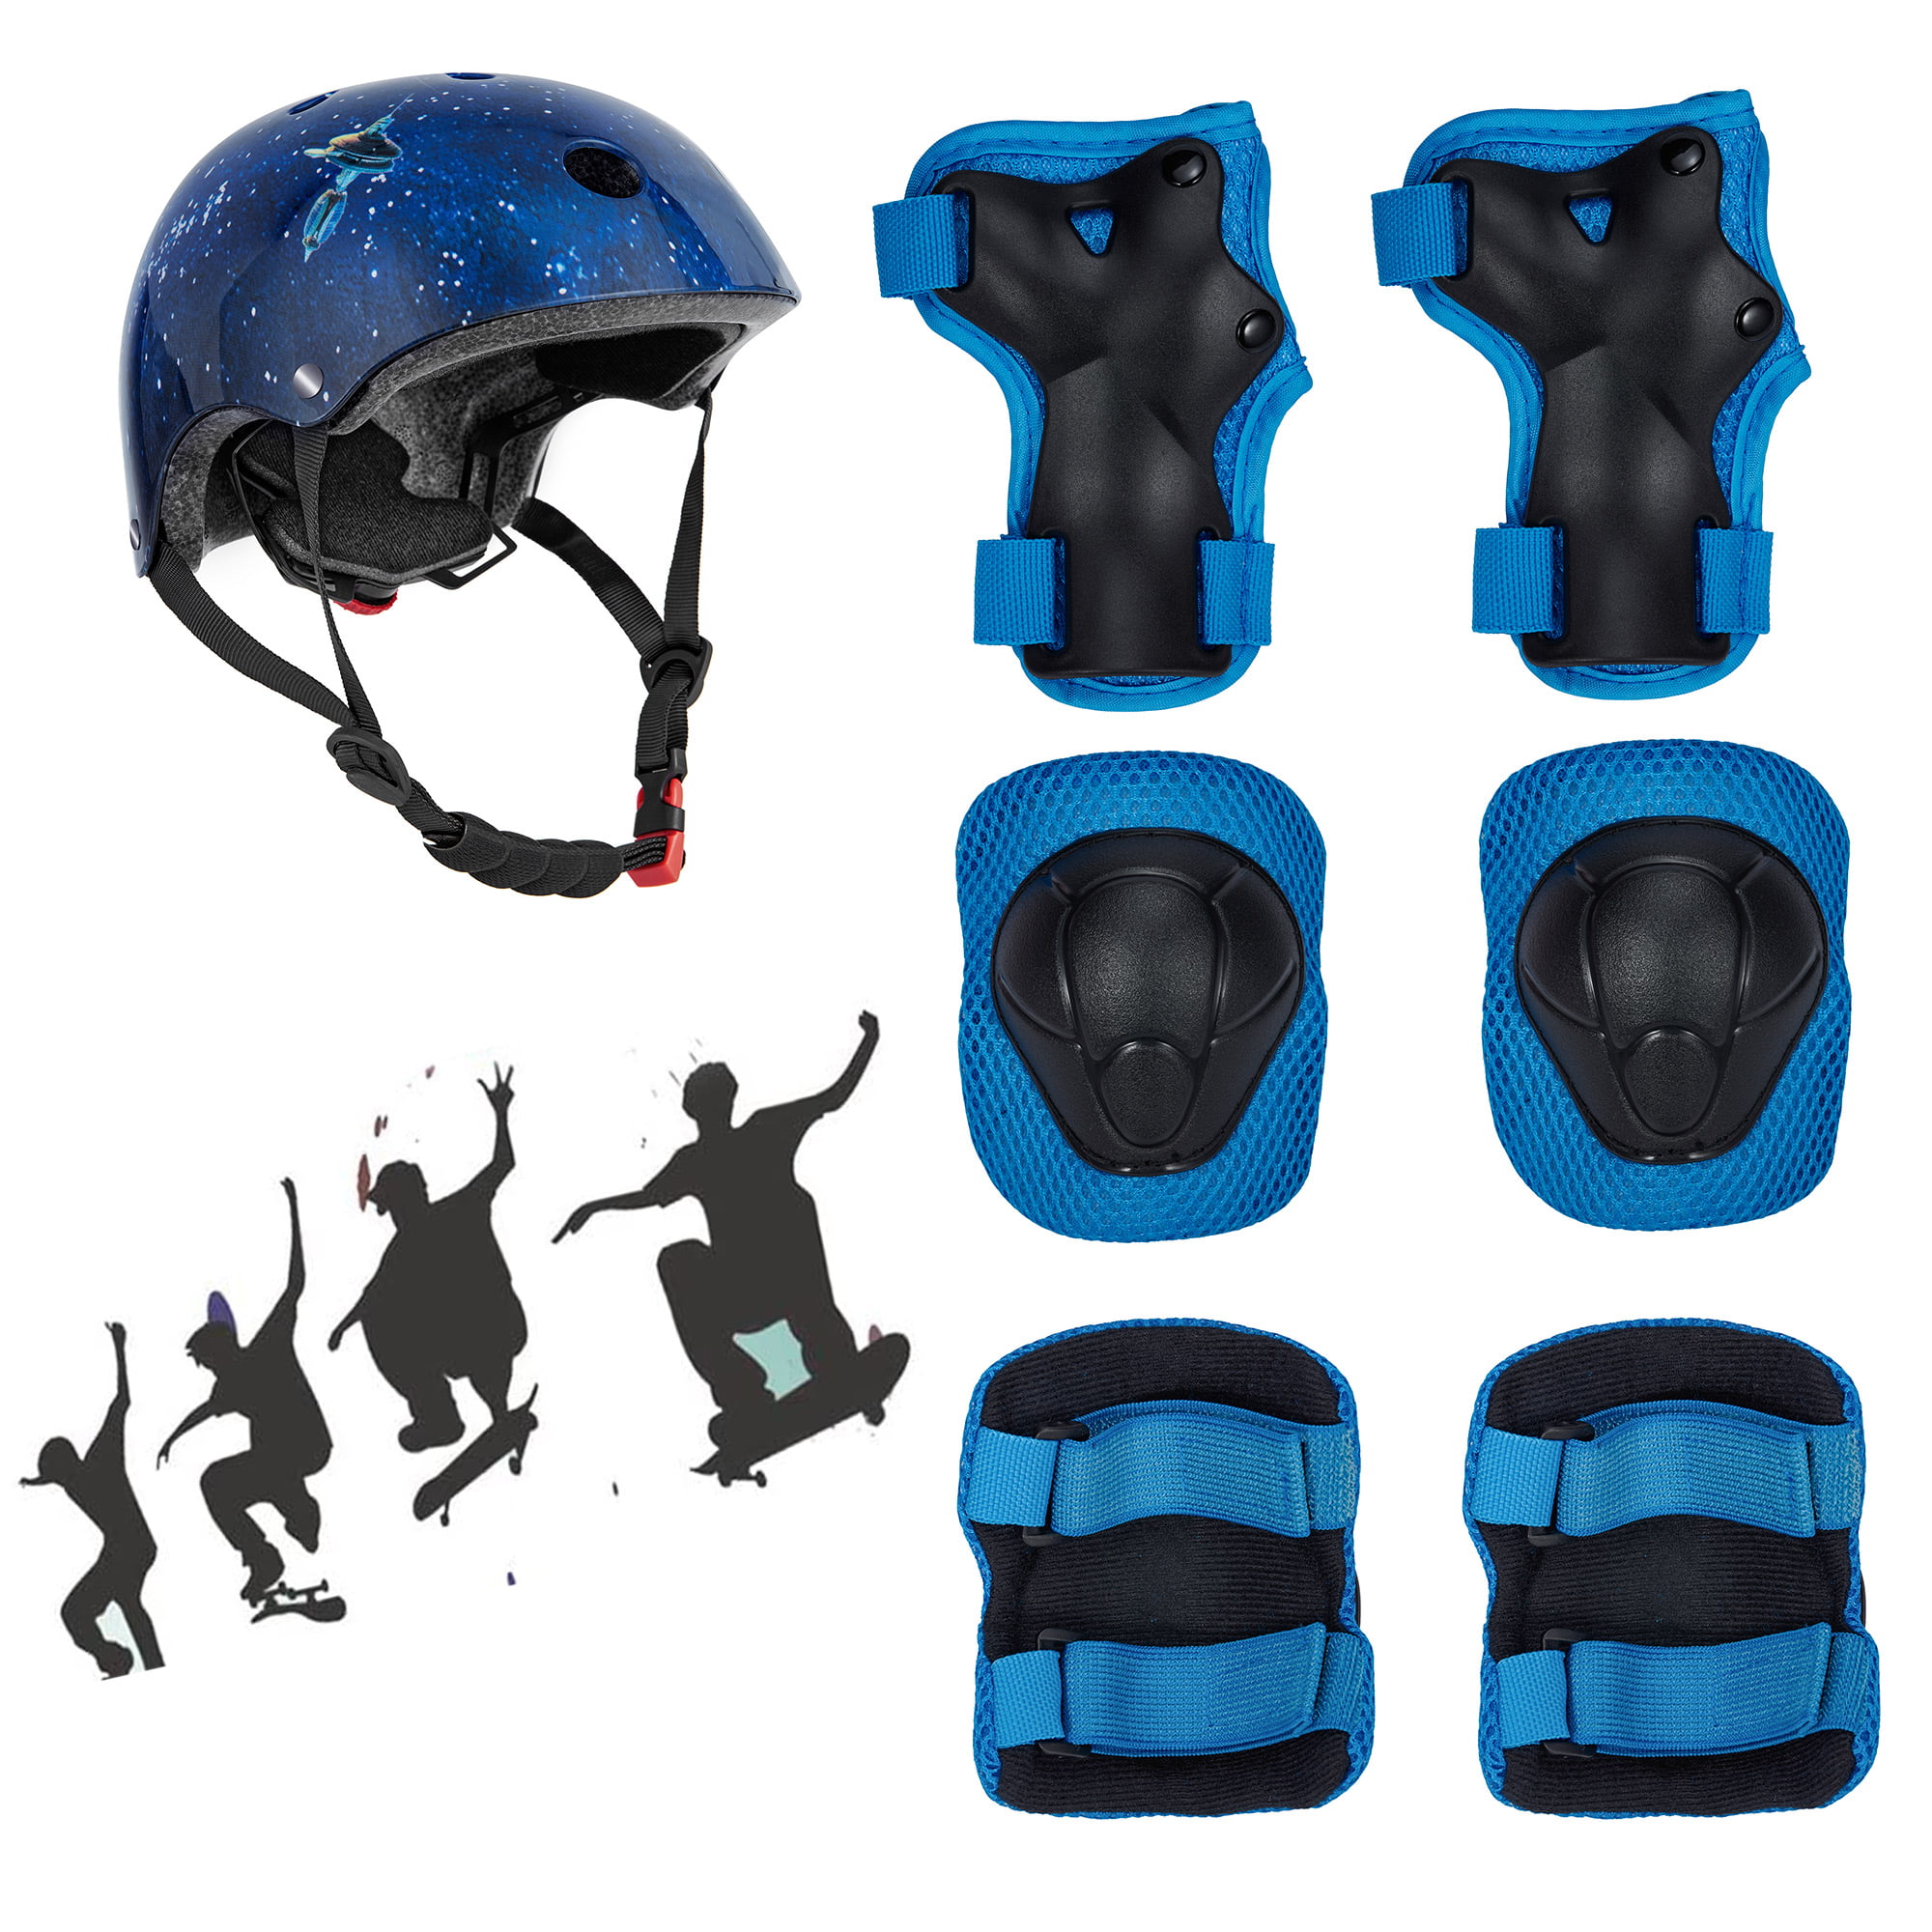 6/7Pcs Elbow Wrist Knee Pads and Helmet For Kids Child Skate Cycling Bike Safety 